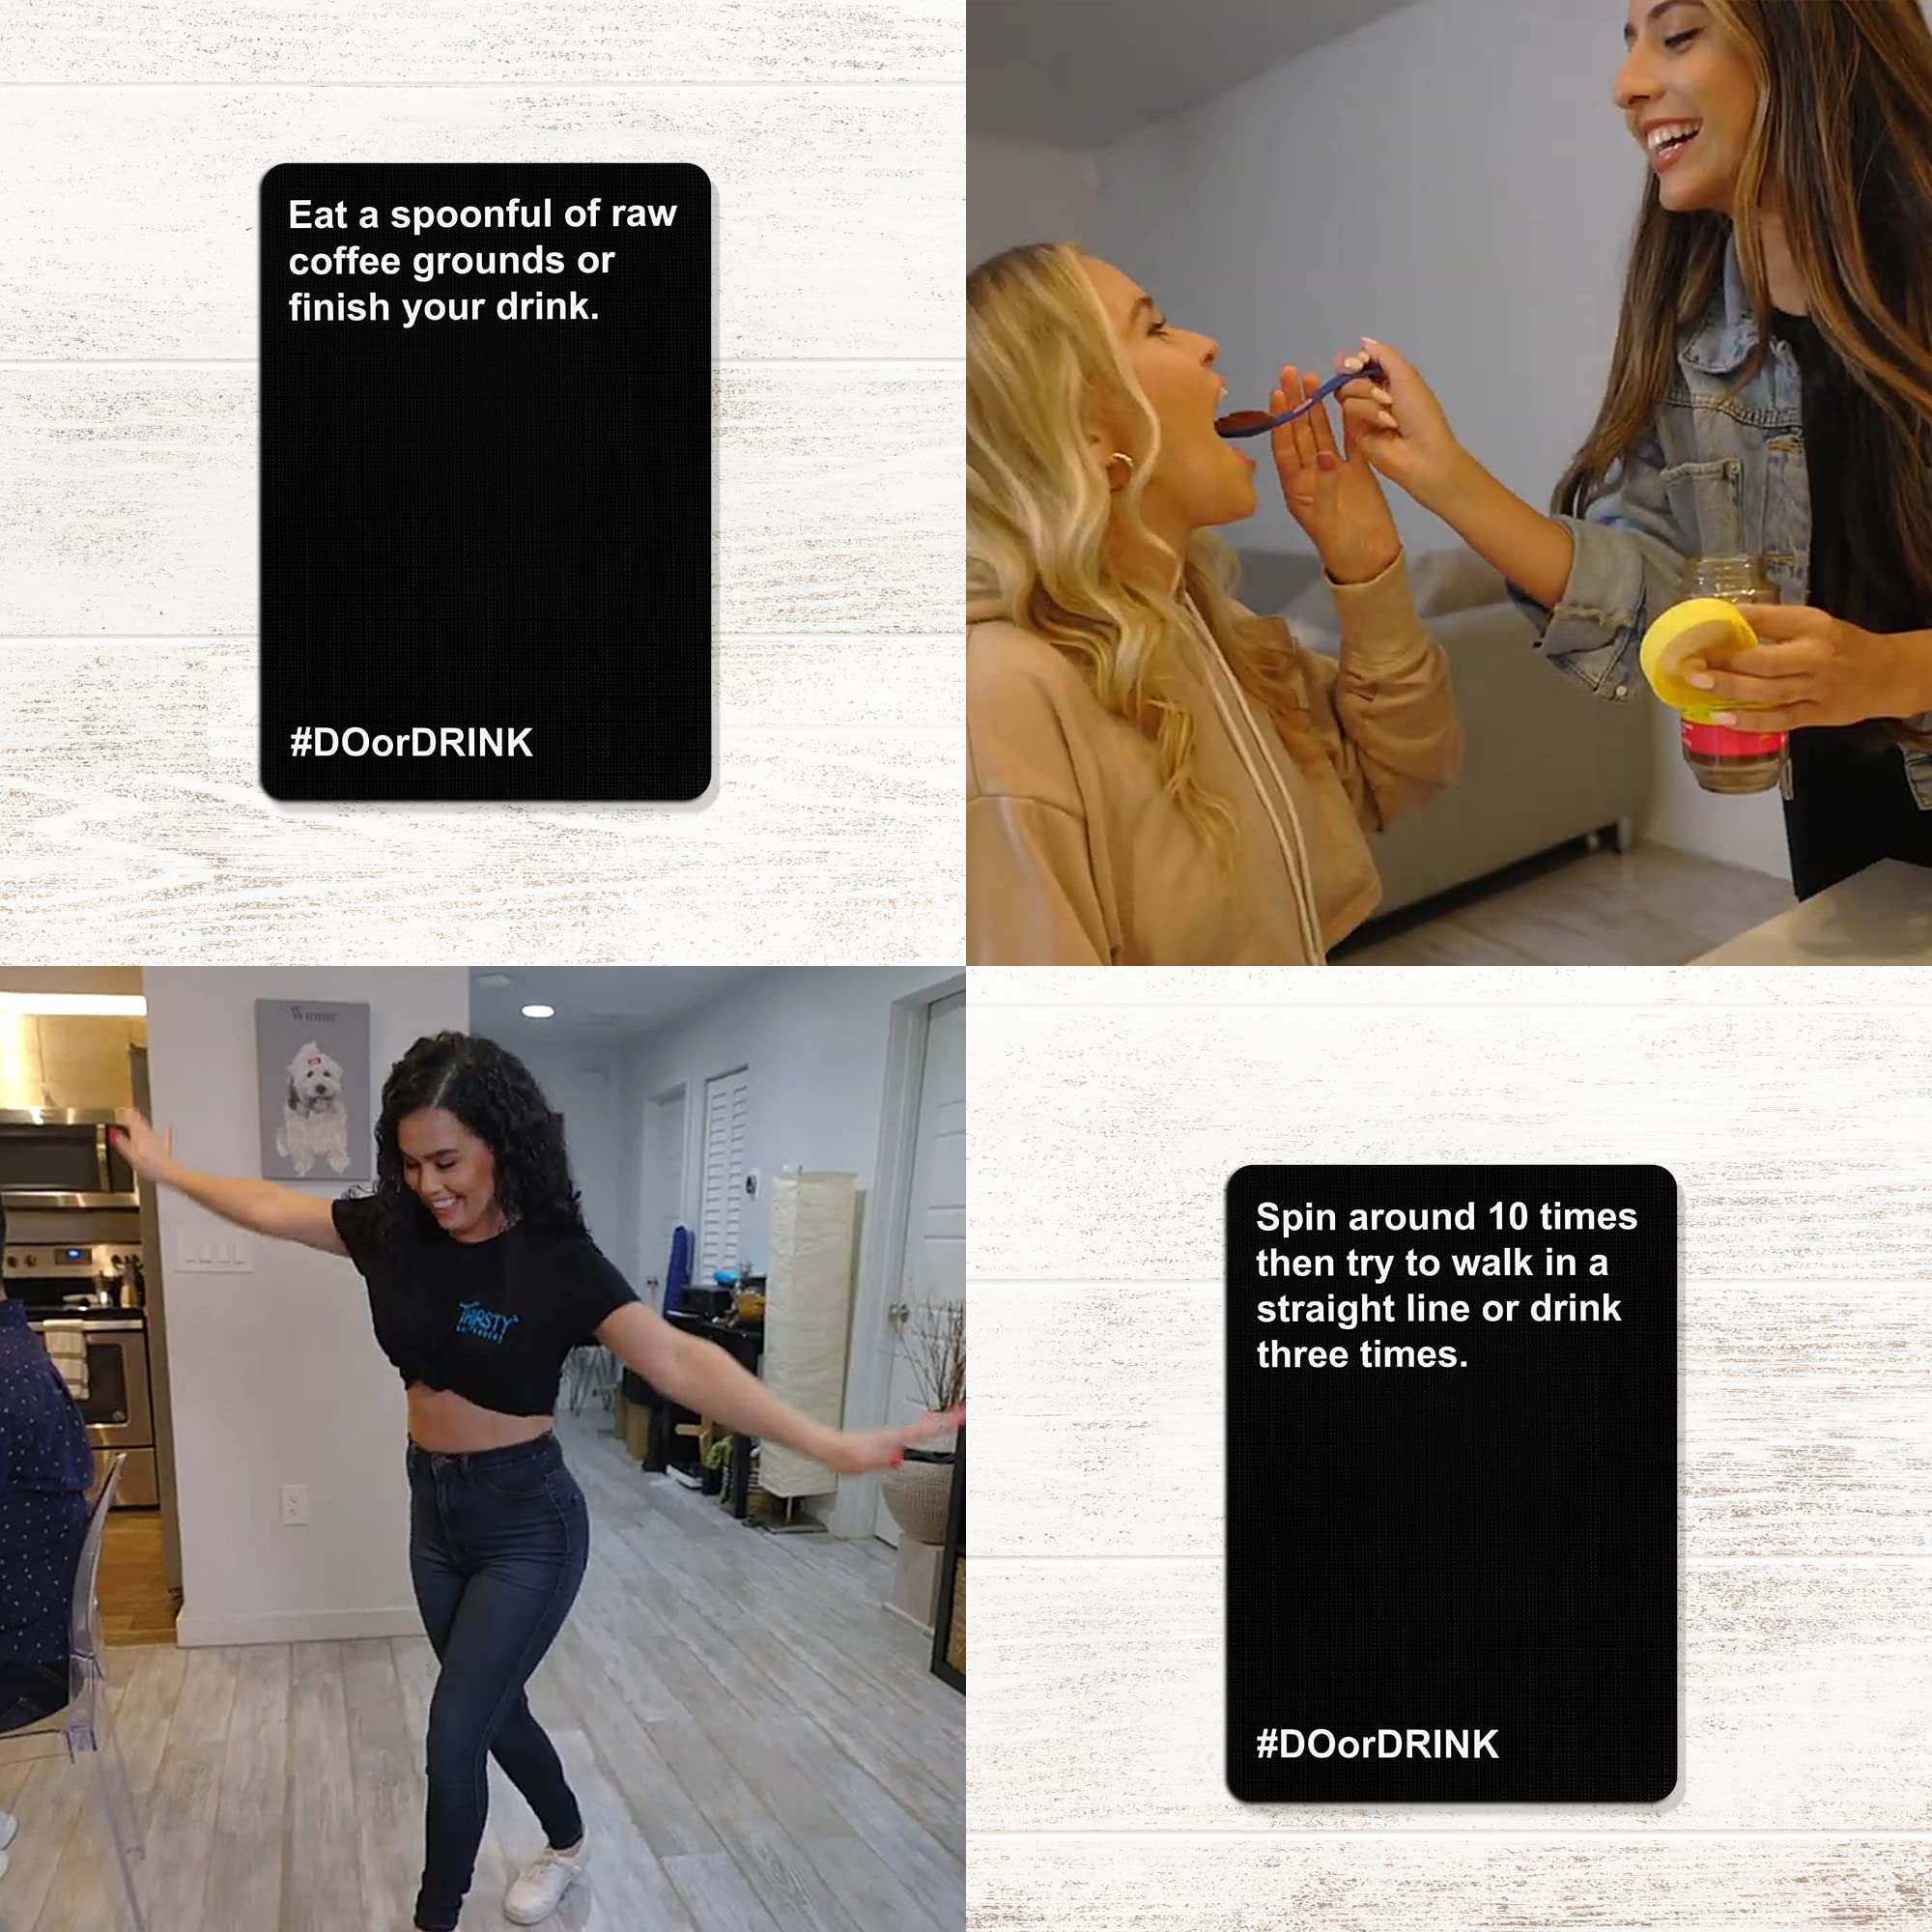 Do or Drink Party Card Game for Adults - Fun Drinking Games for Adults with 350 Cards - 175 Challenges for Game Night, Girls Night, Bachelorette Party, Couples, After Parties and More